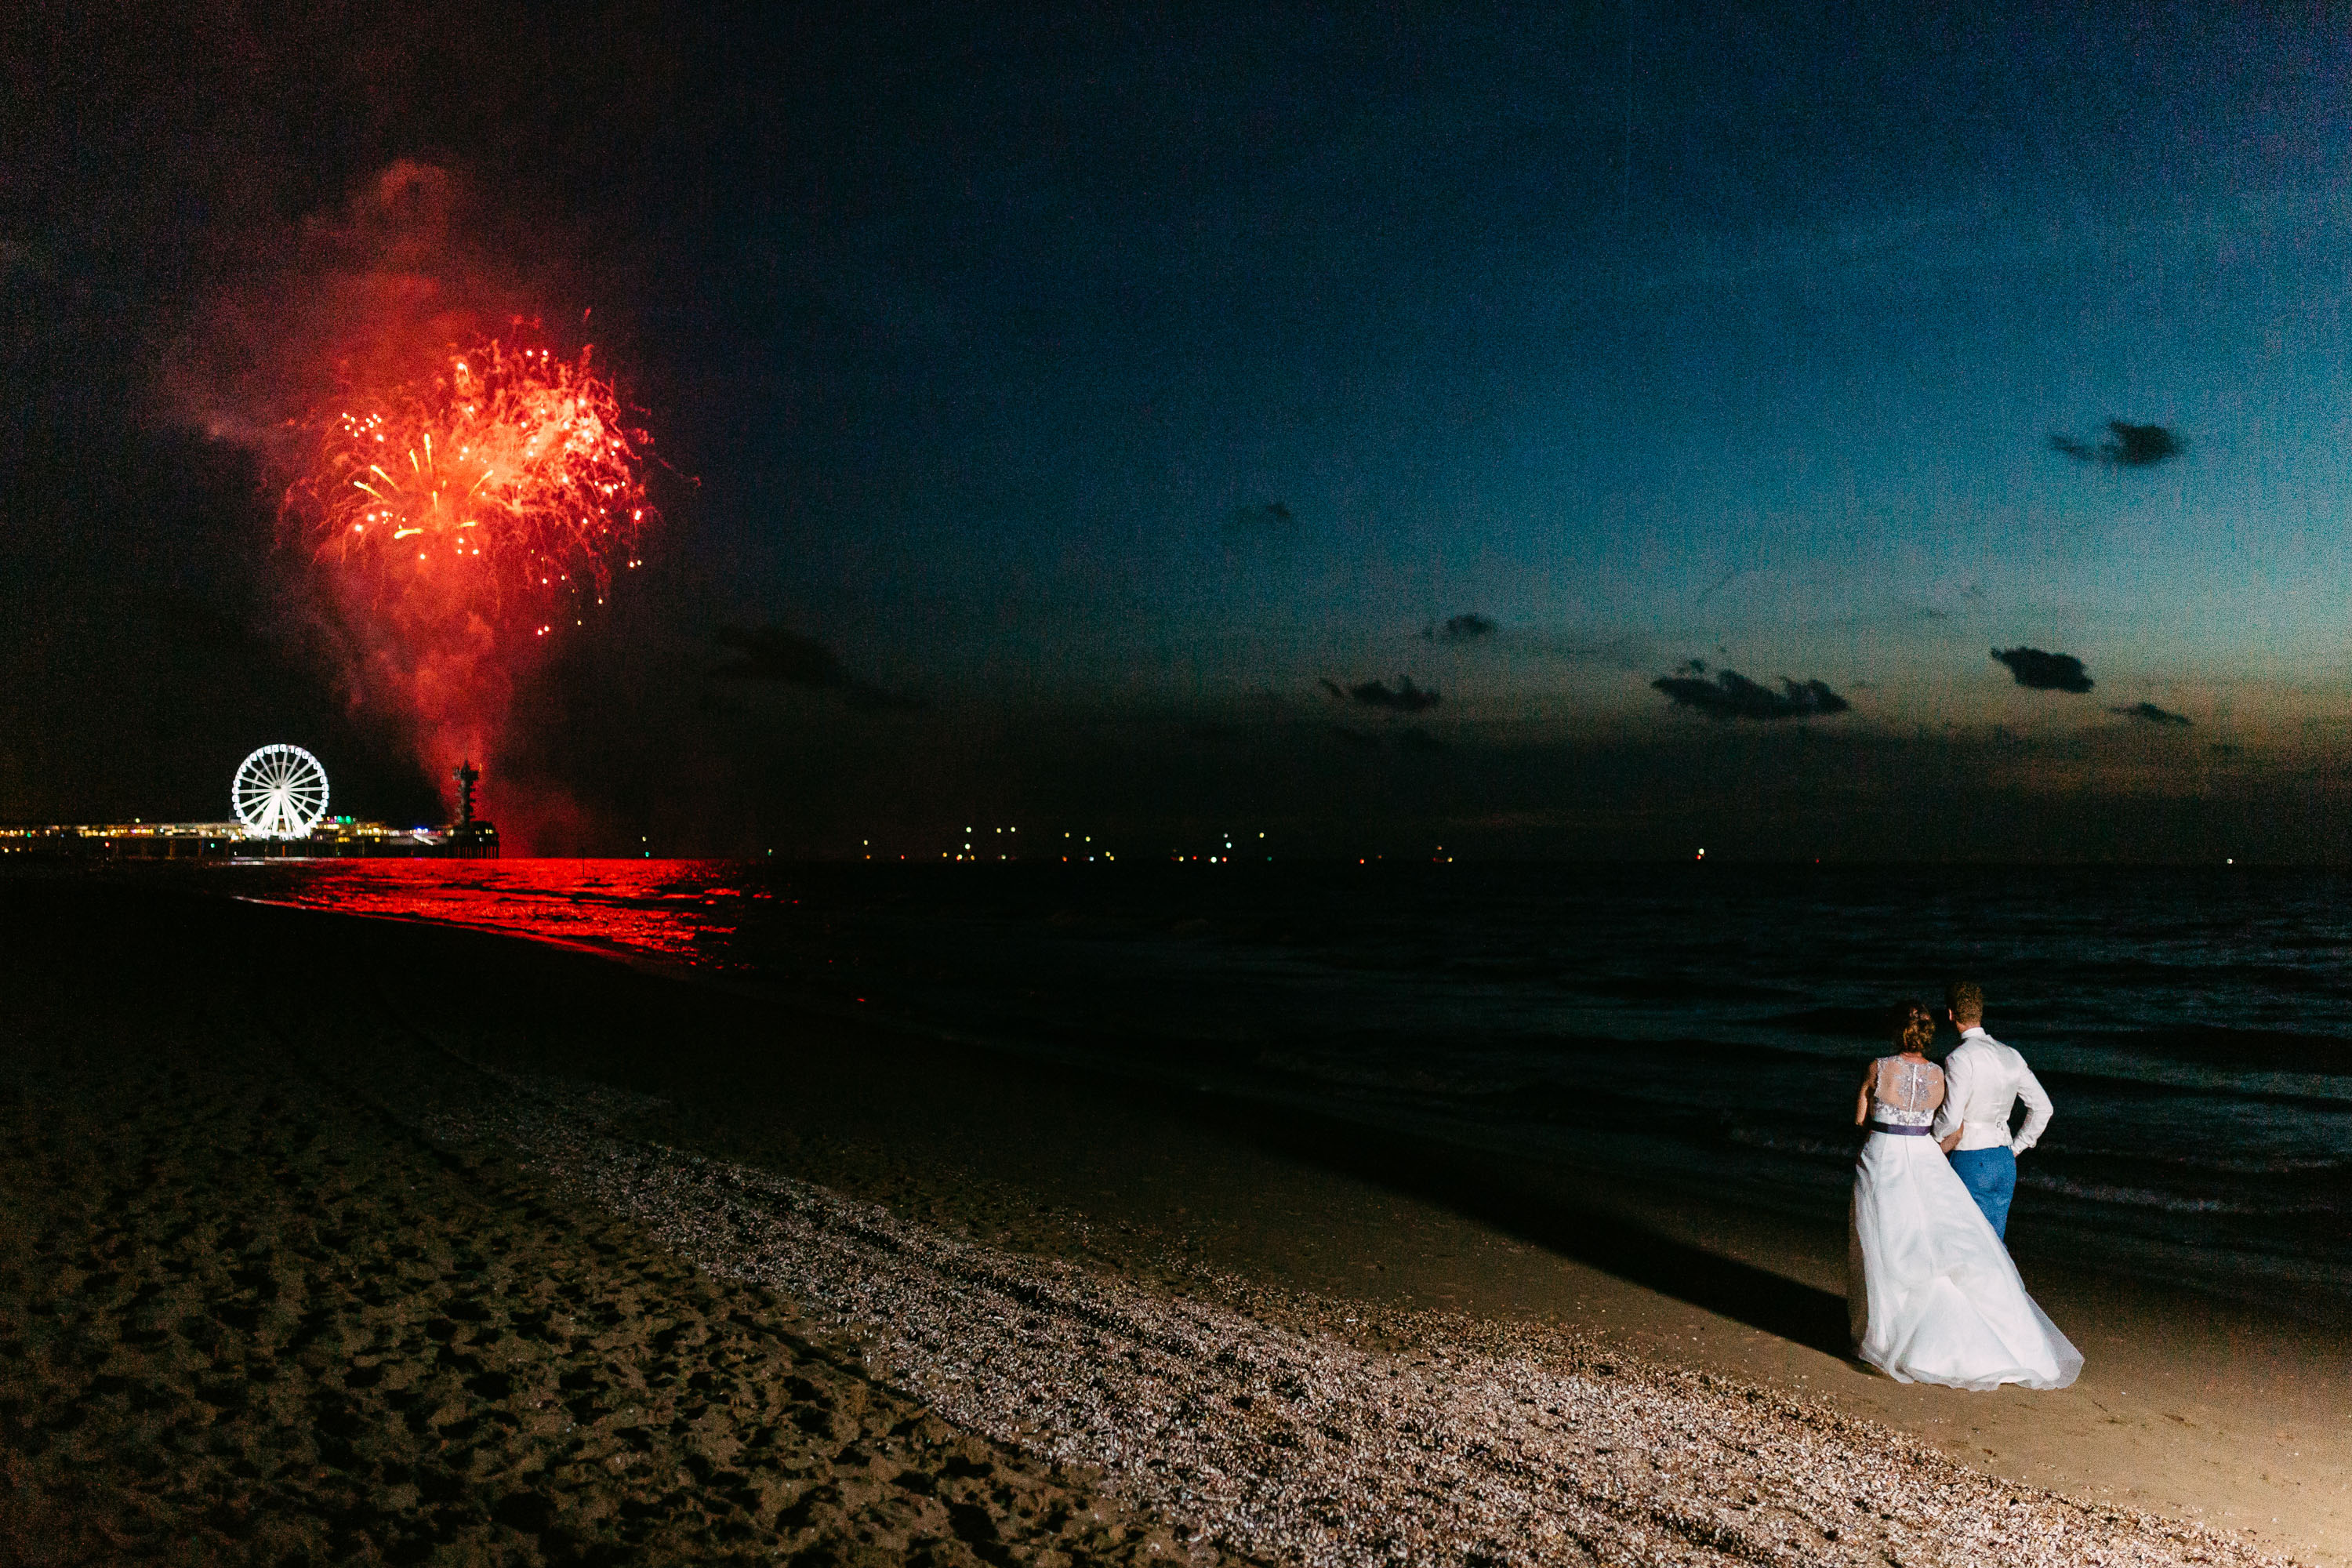 A bride and groom stand on the beach during a wedding shoot, with fireworks in the background.